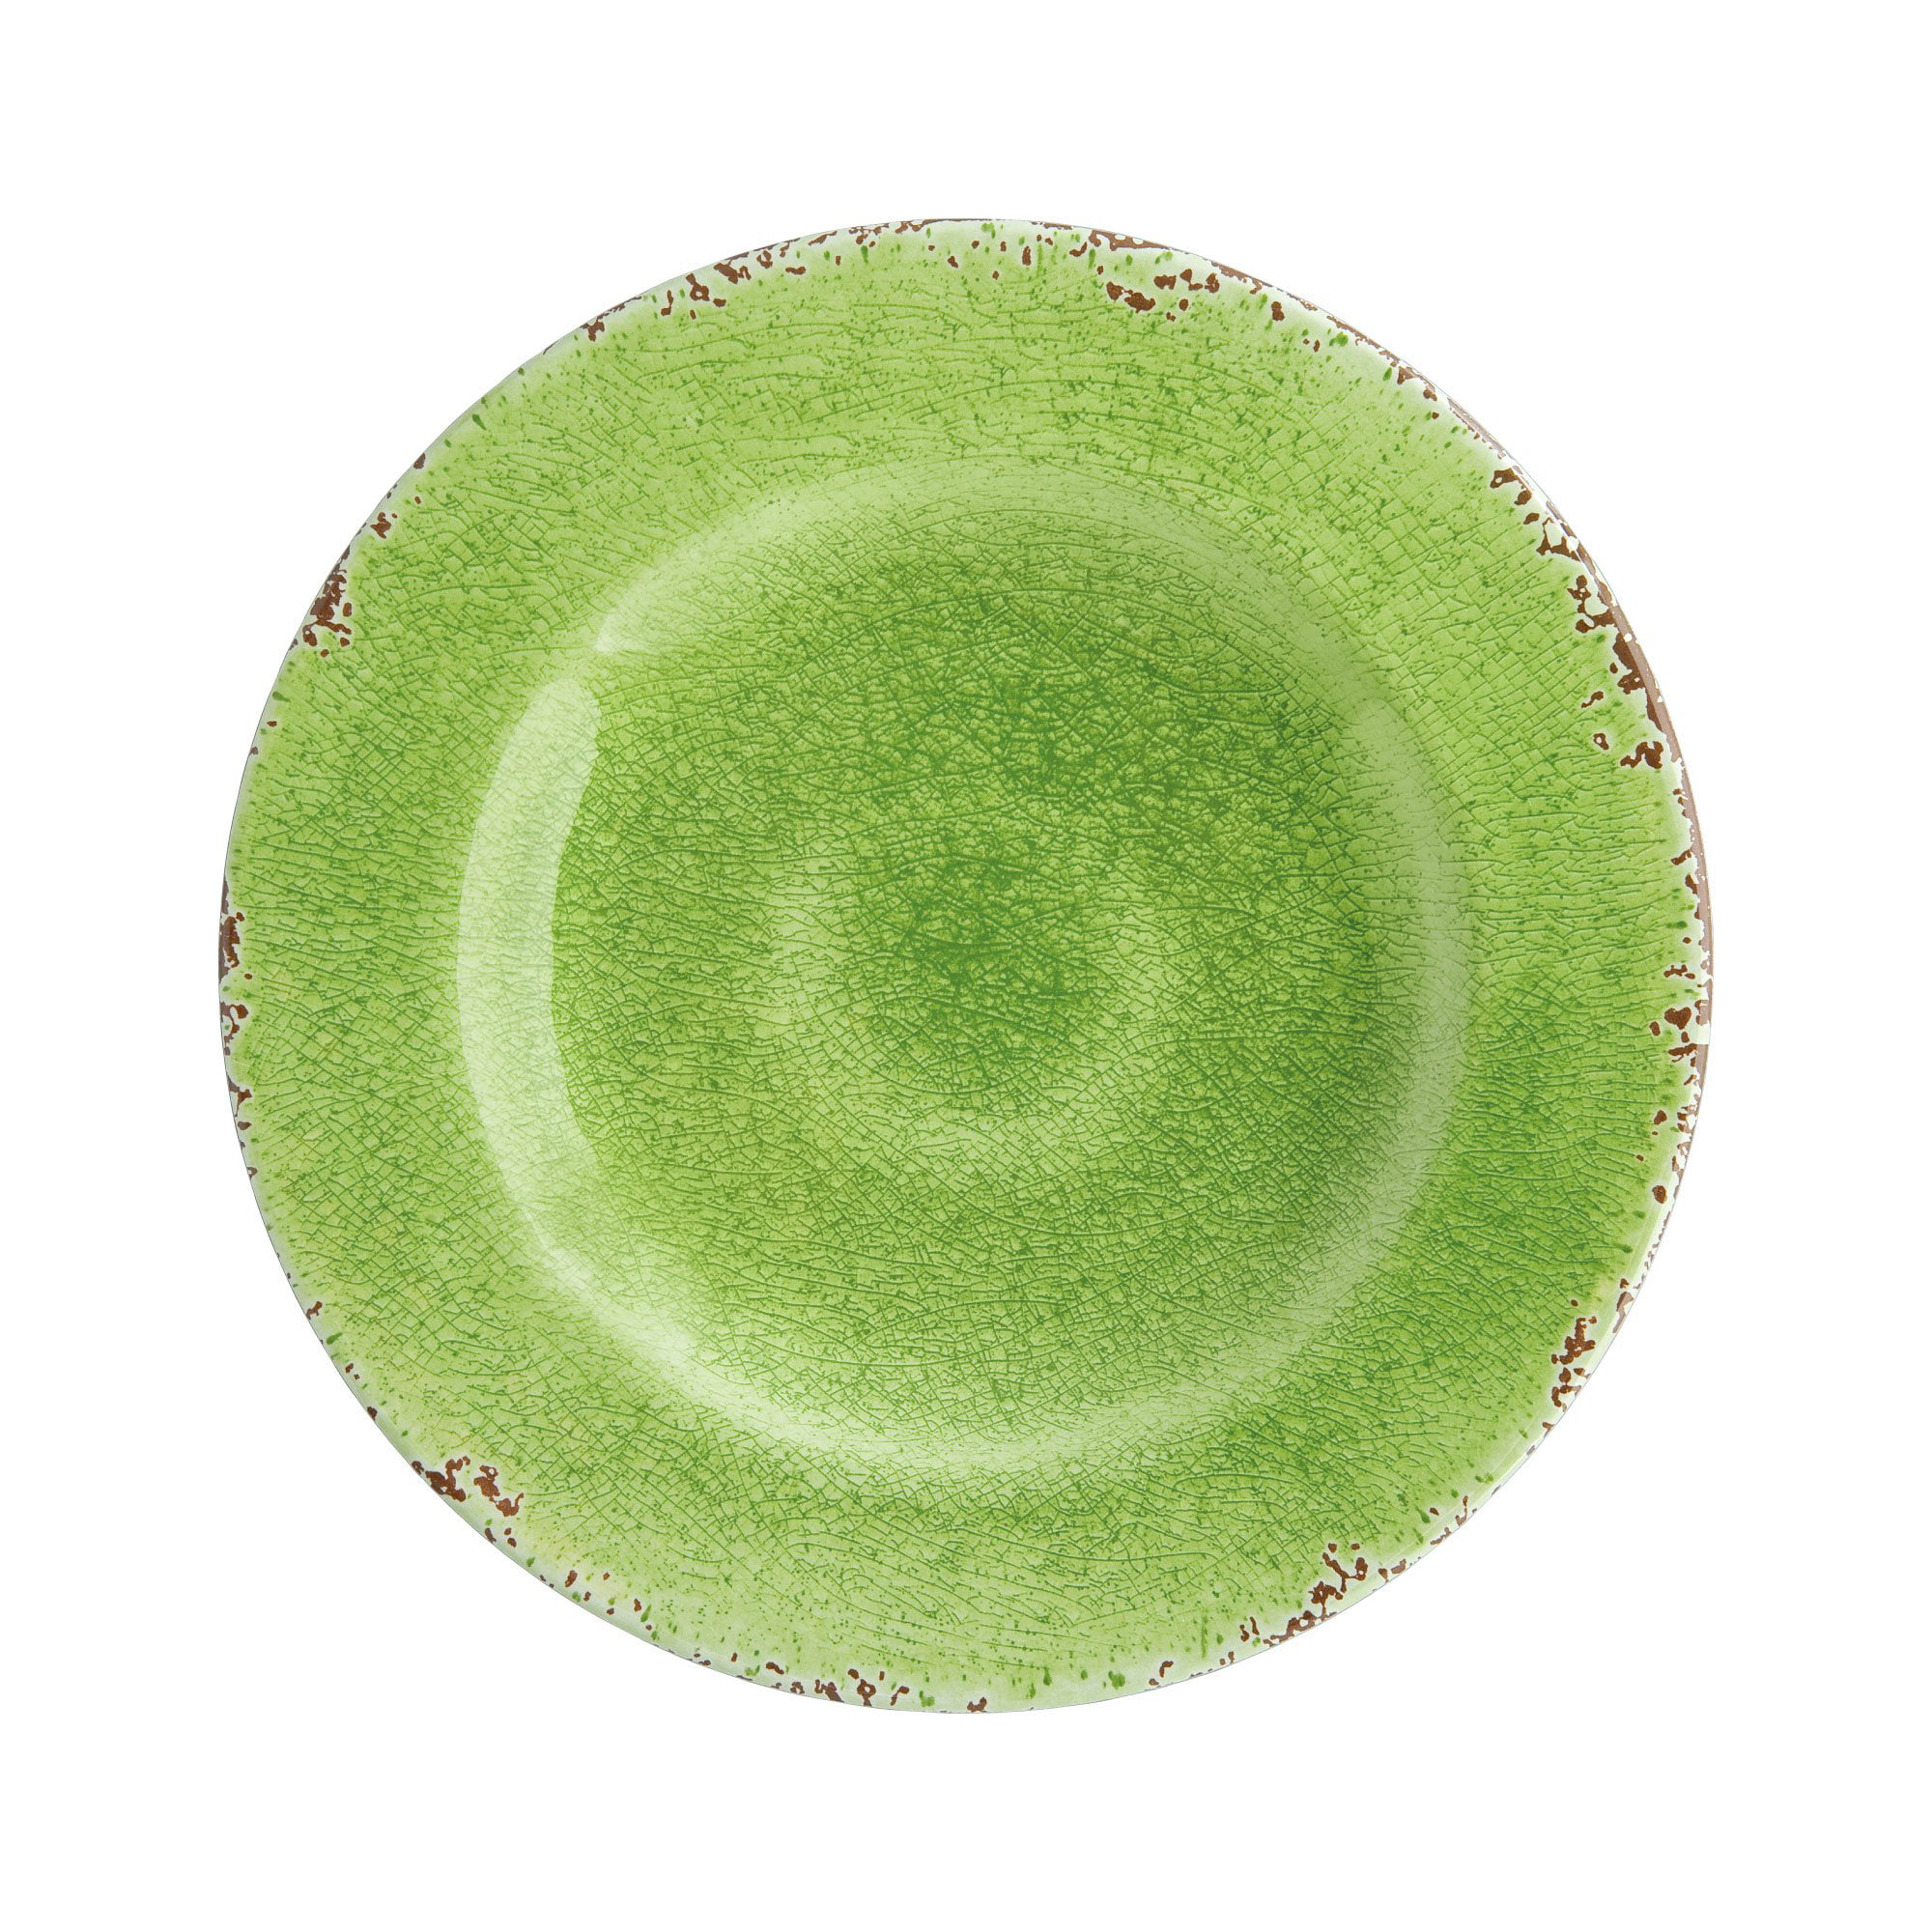 Gourmet Art 12-Piece Crackle Melamine Dinnerware Set, Green, Service for 4.  Includes Dinner Plates, Salad Plates and Bowls. 